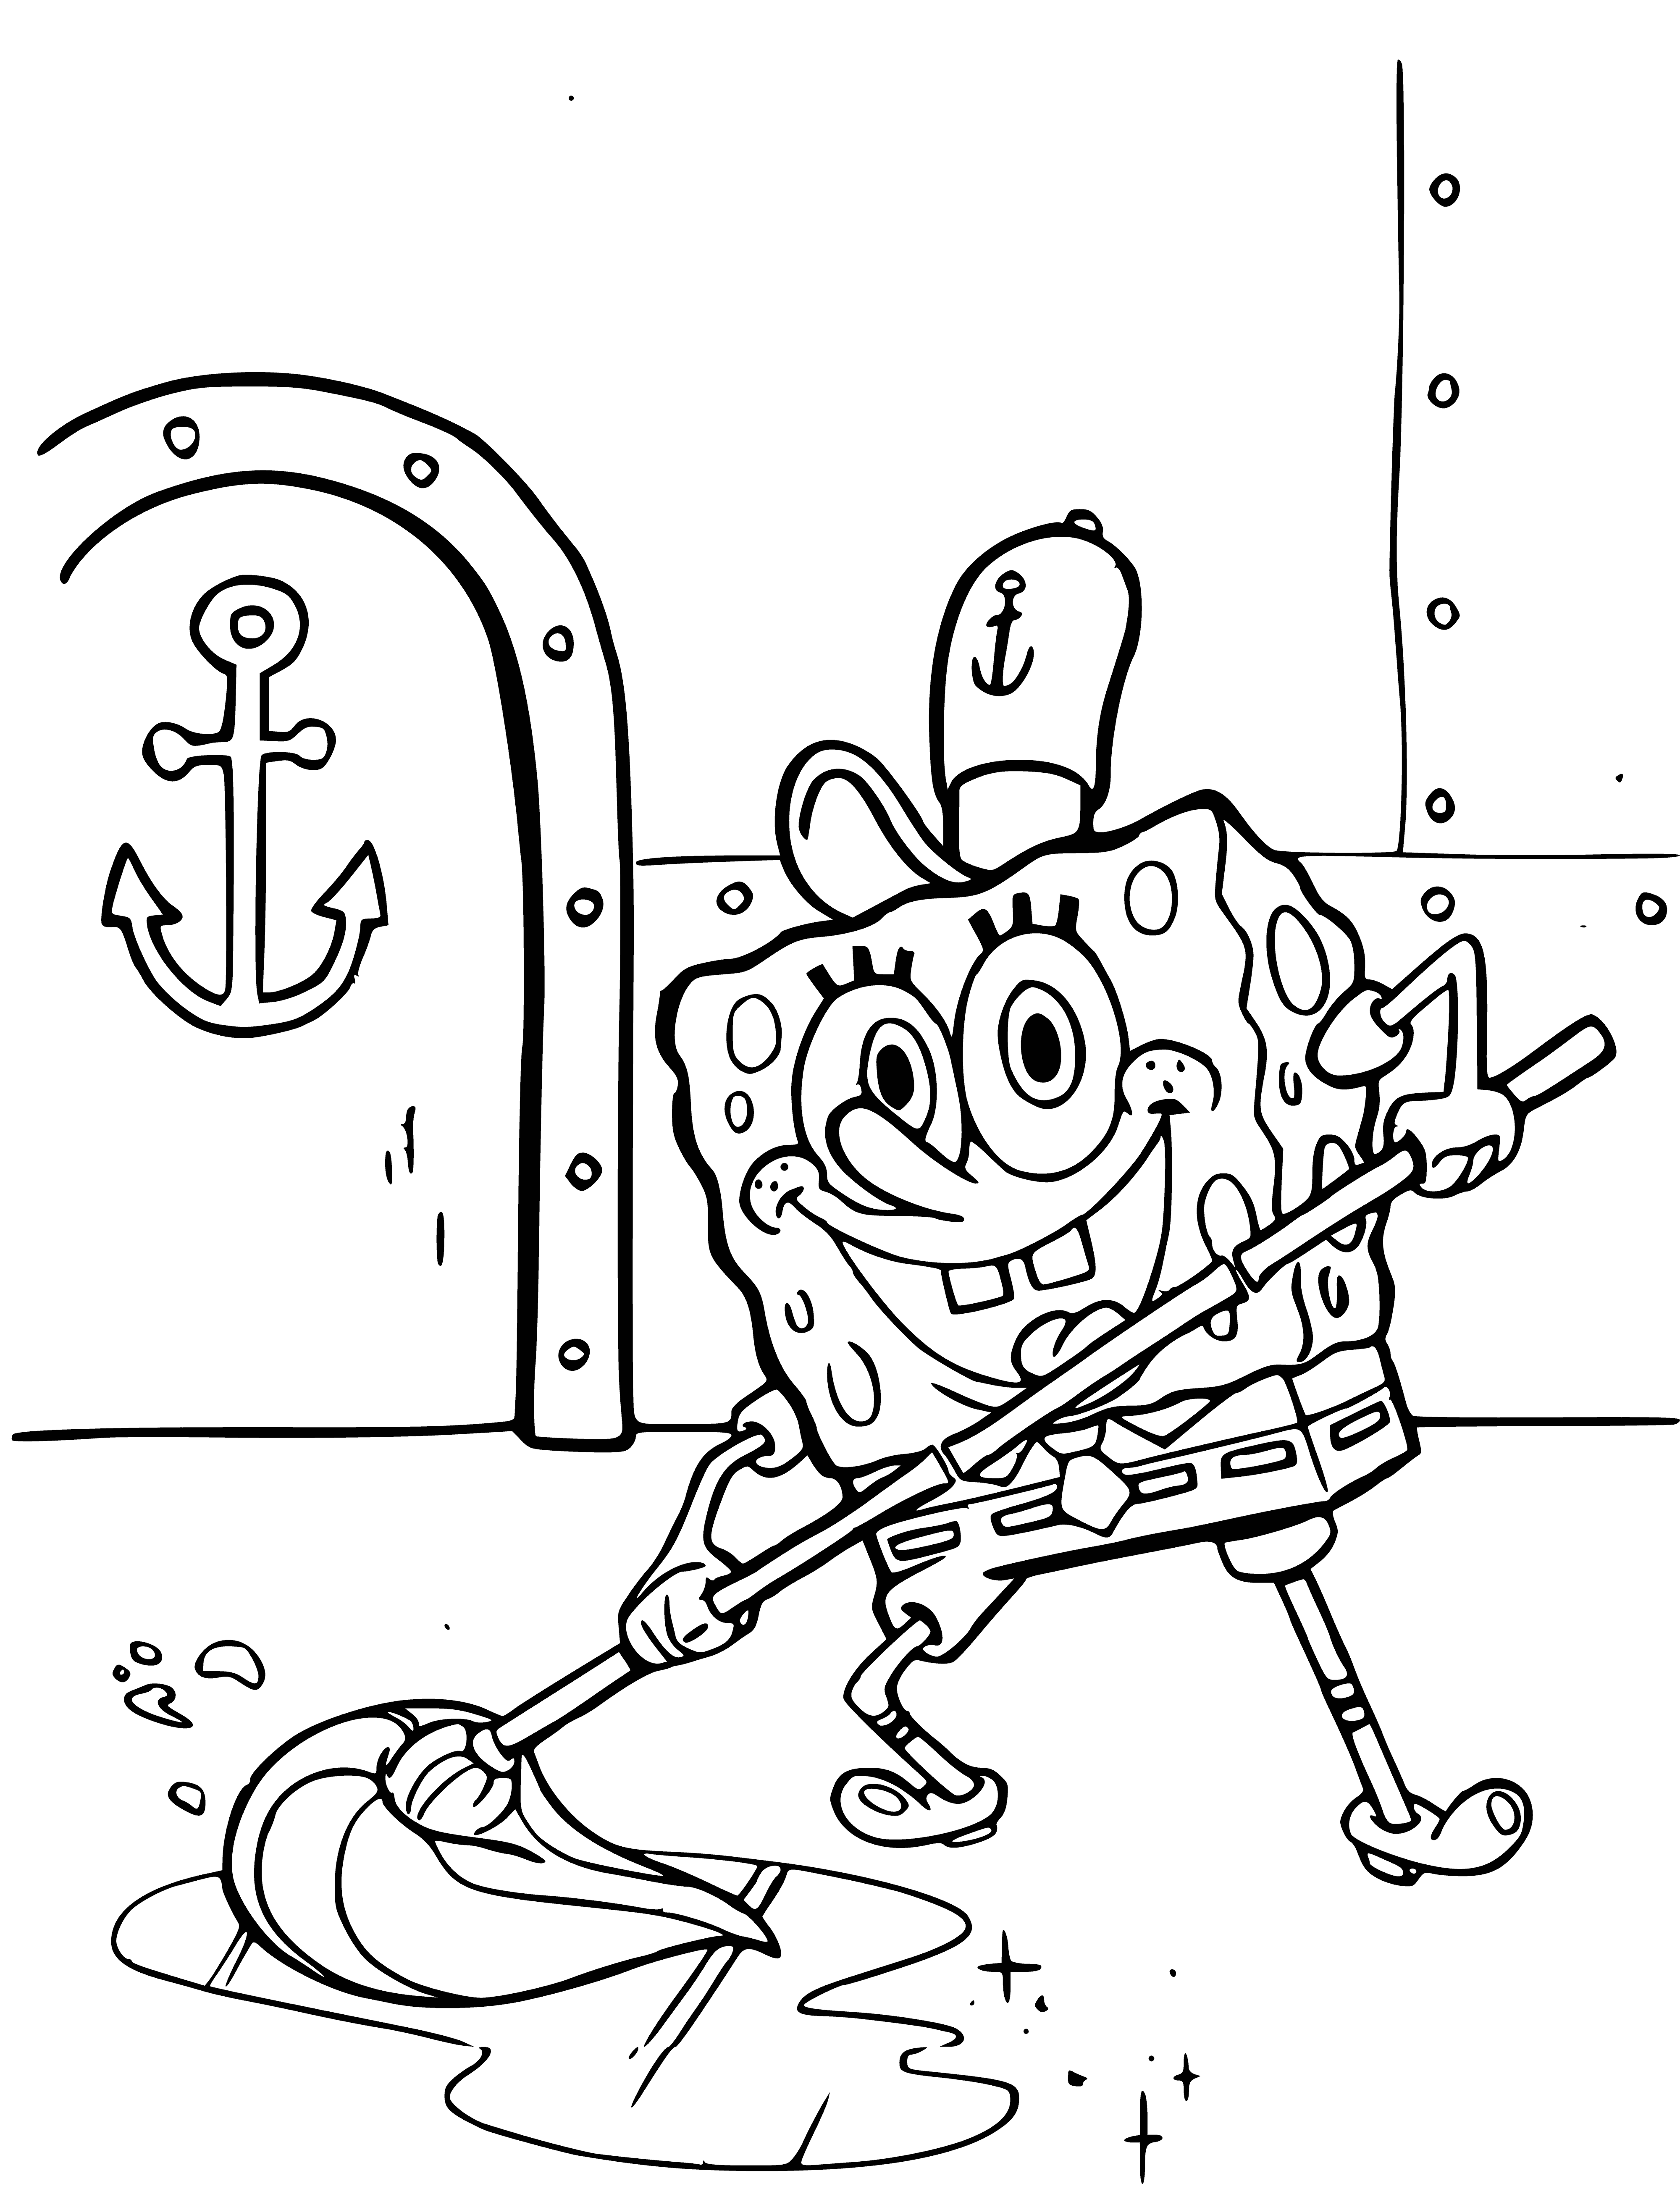 coloring page: SpongeBob cooks up some food at the Krusty Krab with spatula, pot, and chef's hat.